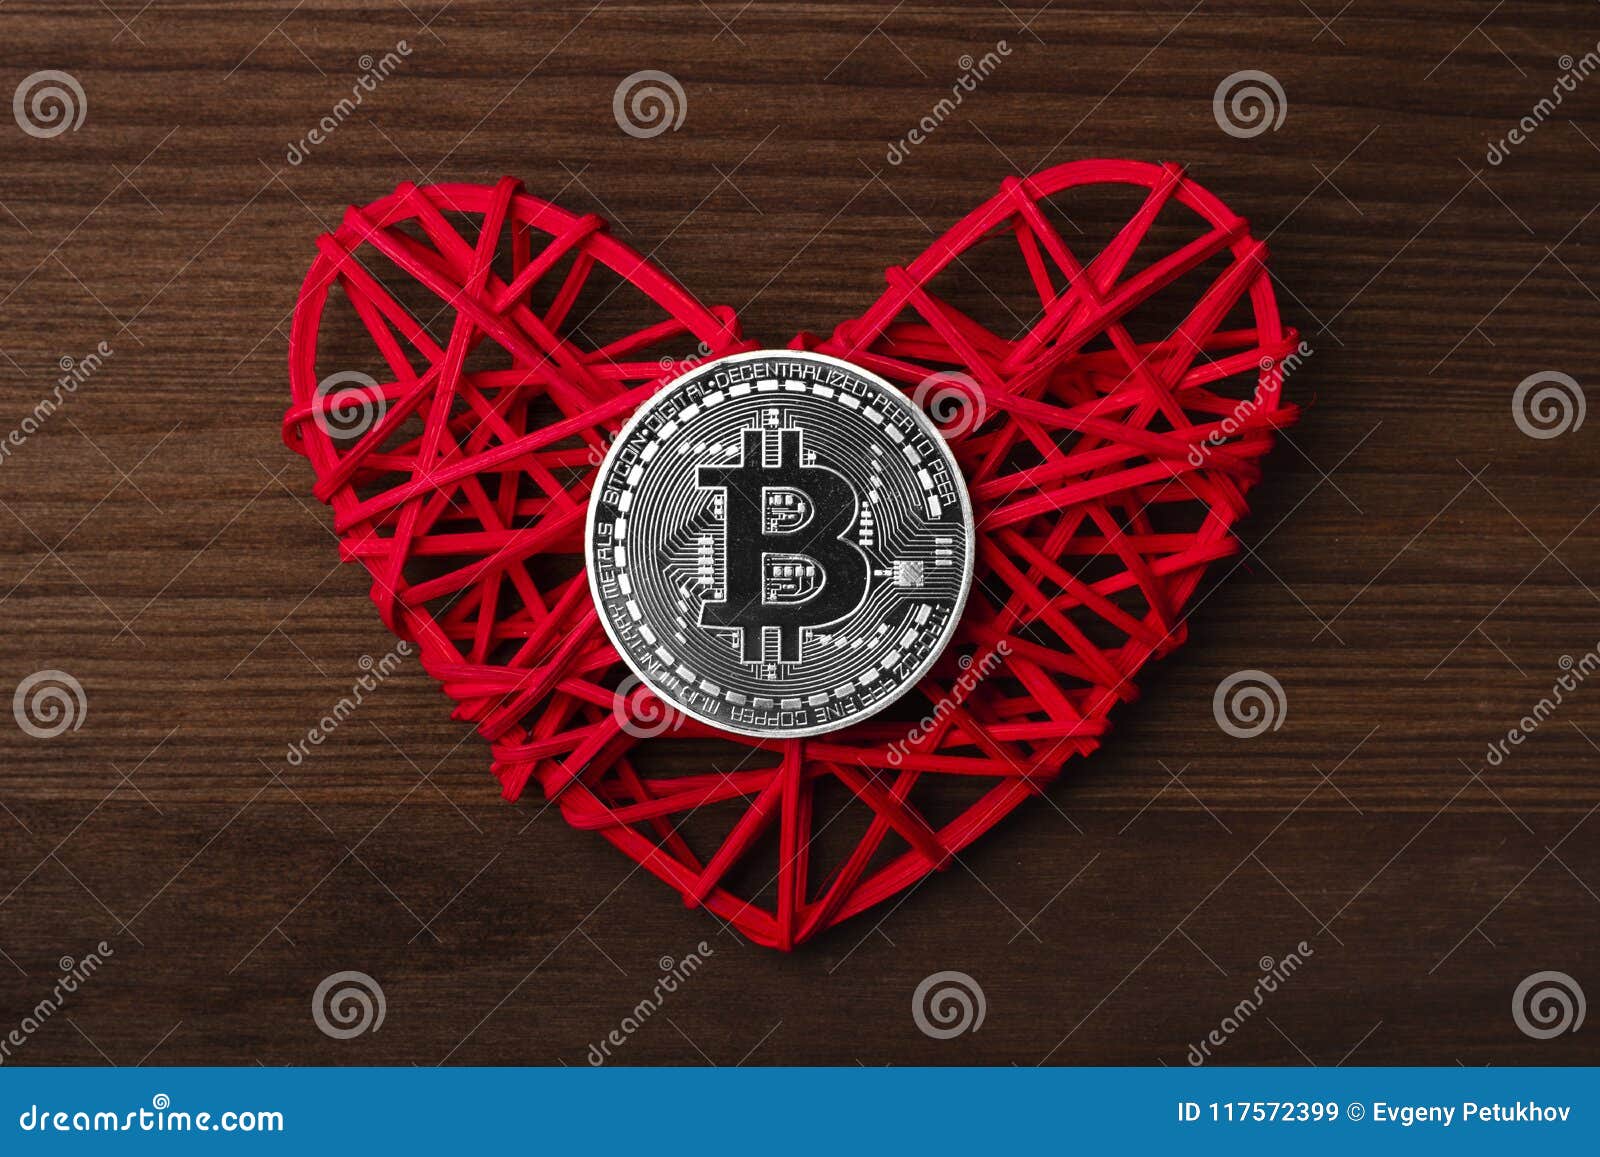 Bitcoins images of hearts coinmate crypto exchange